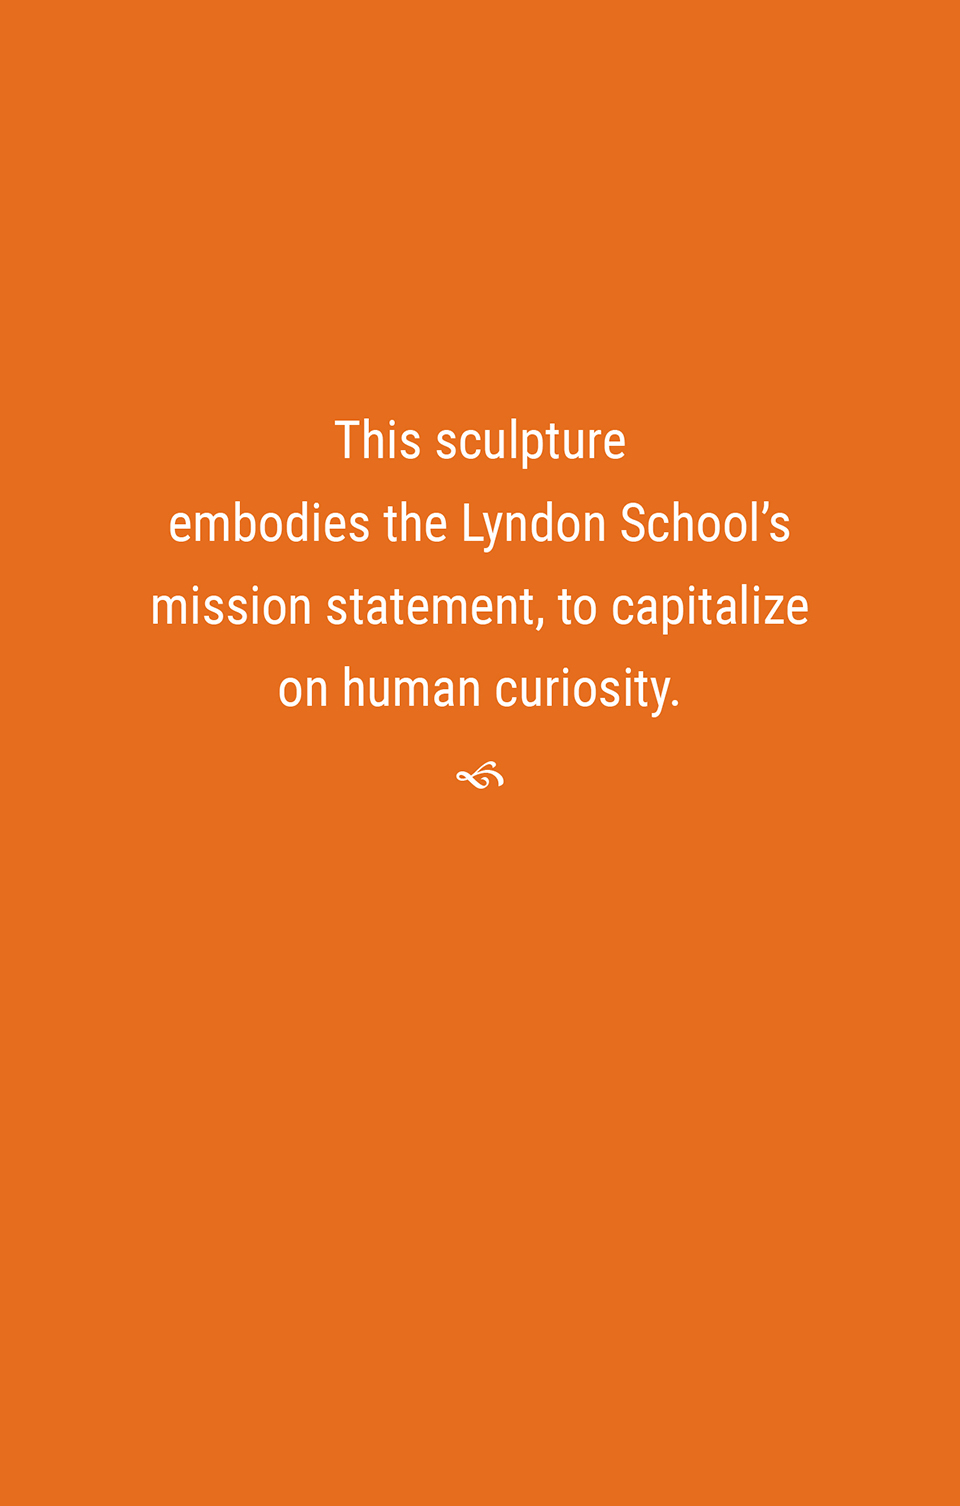 This sculpture embodies the Lyndon School’s mission statement—to capitalize on human curiosity.